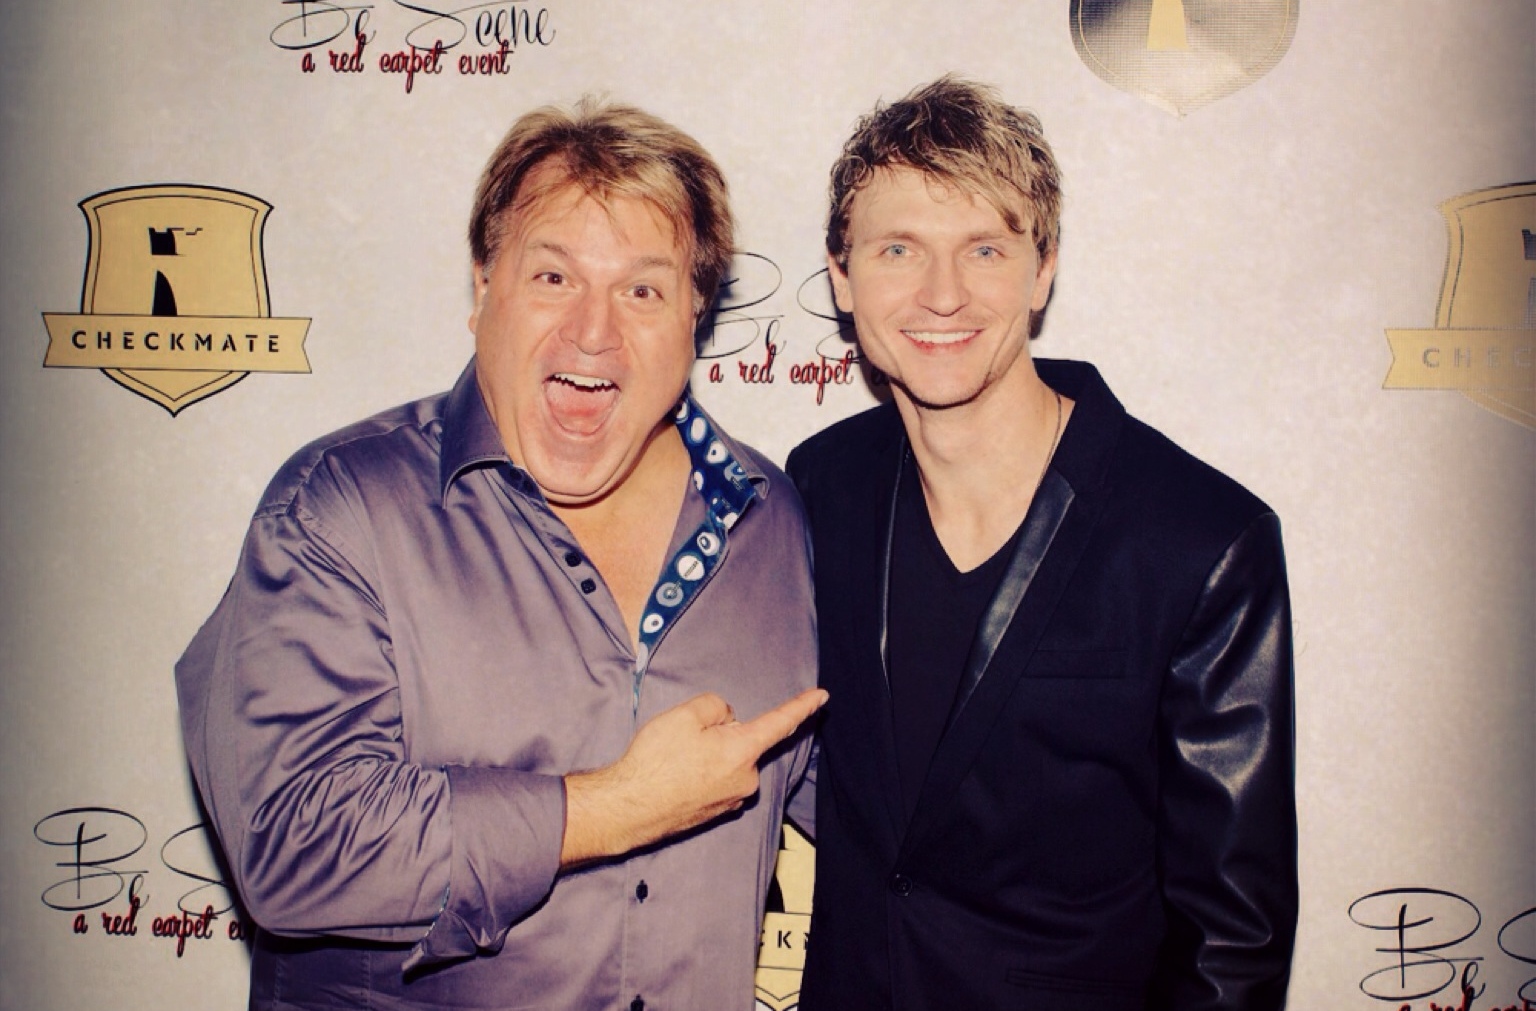 Supernatural Producer Jim Michaels and Chad Rook at the BE SCENE Red Carpet Event